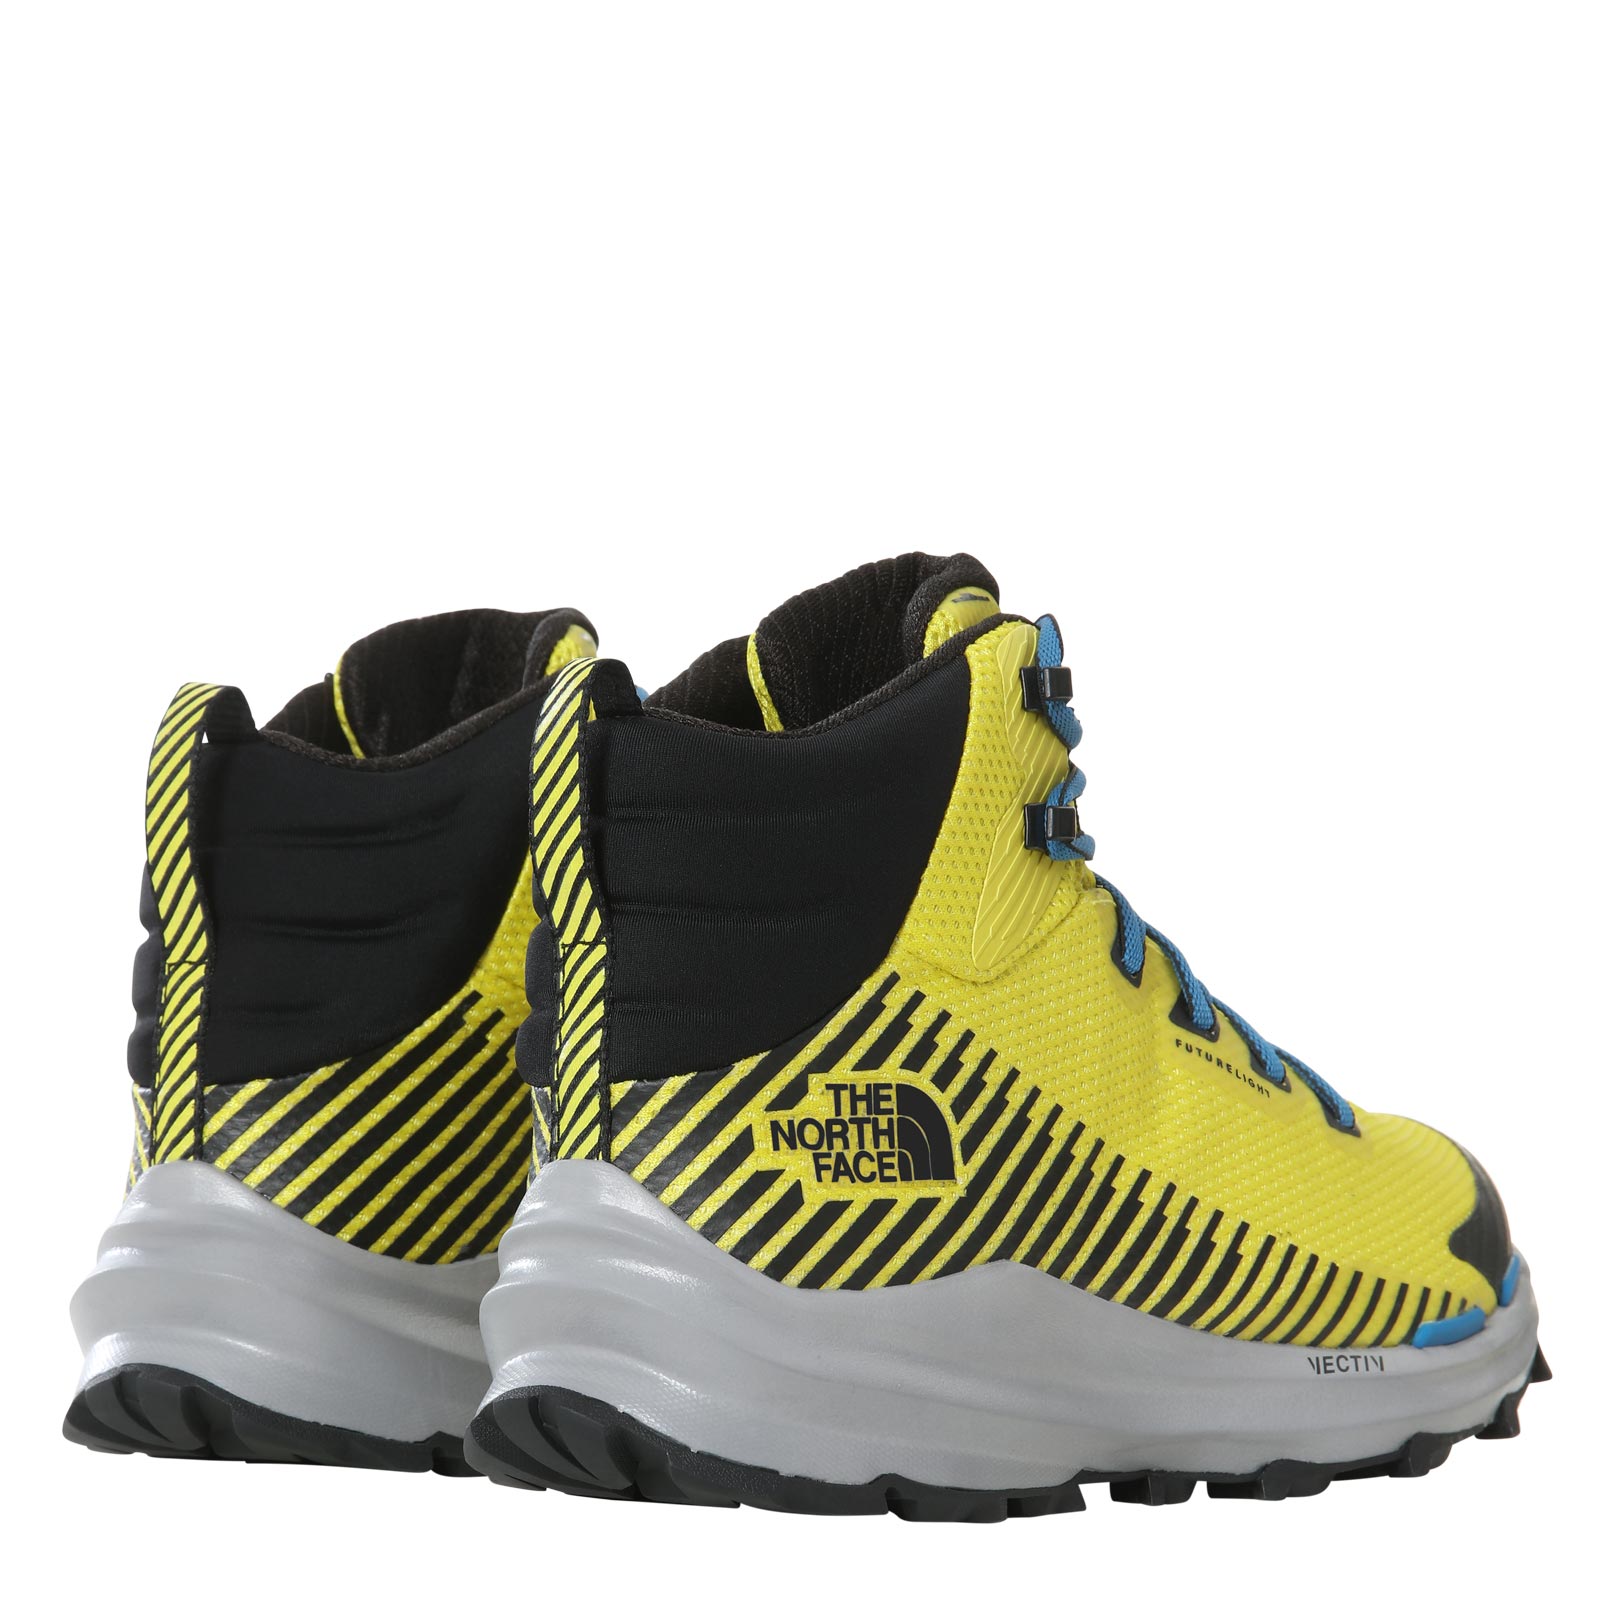 THE NORTH FACE VECTIV™ FASTPACK FUTURELIGHT™ MENS MID HIKING BOOTS